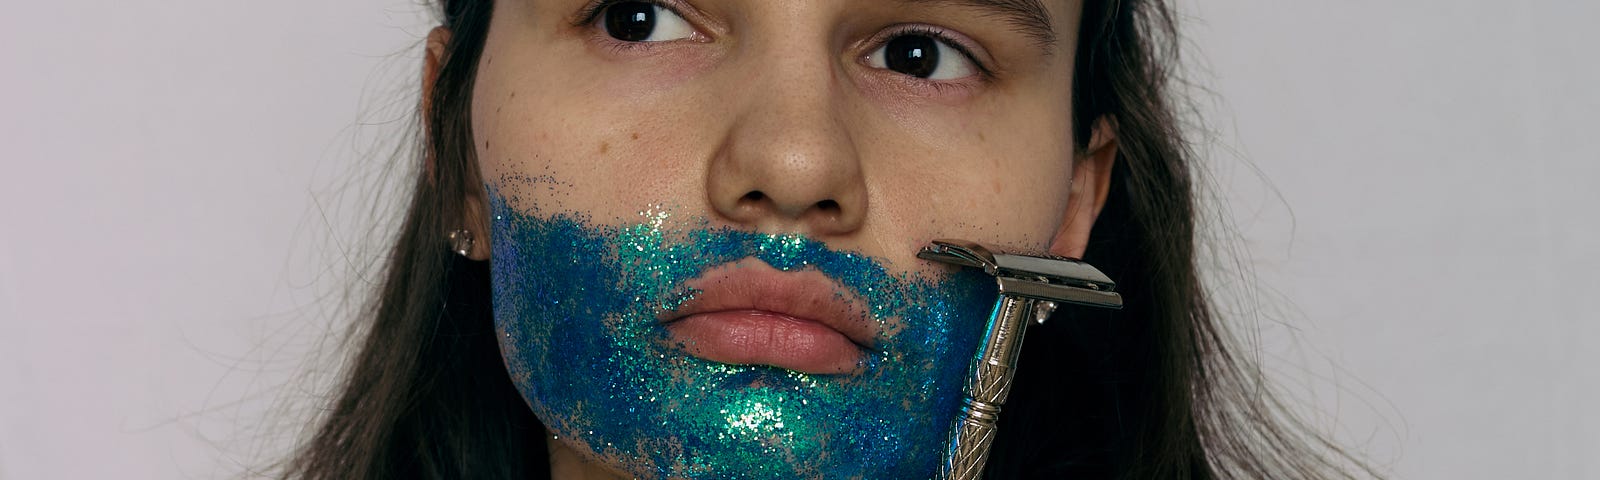 A woman with a beard and mustache made out of blue glitter holds a shaving razoe next to her face in a thoughtful moment.